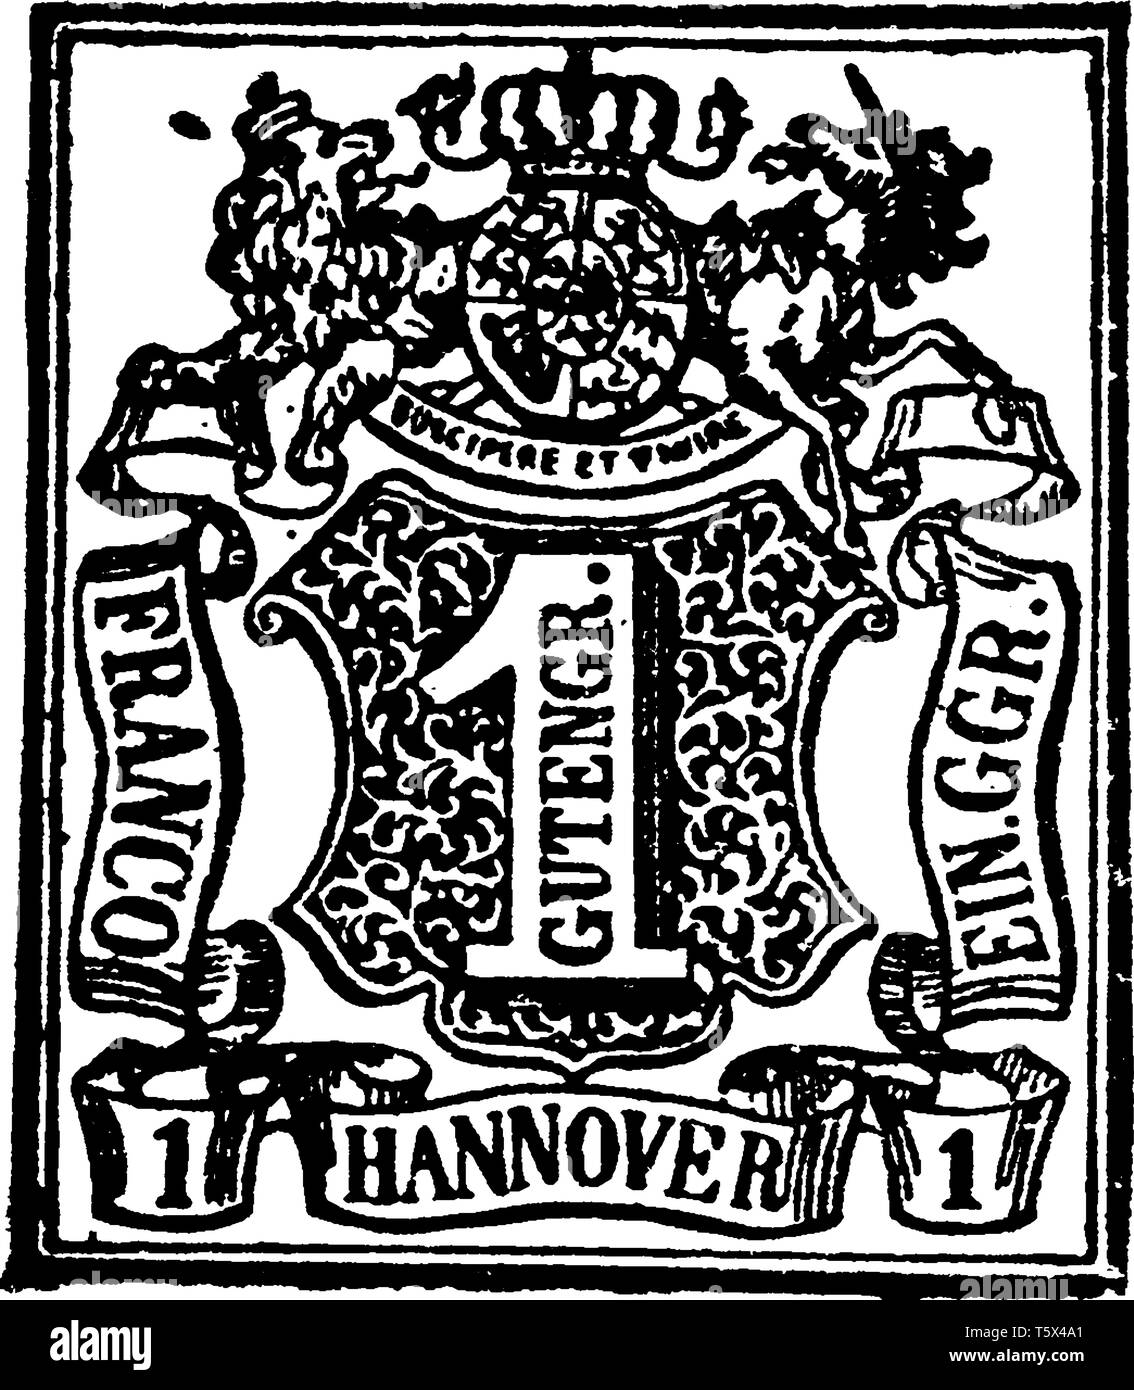 Hanover 1 Gutengr Stamp in 1850 is a French term referring to an intricate network of fine lines, vintage line drawing or engraving illustration. Stock Vector